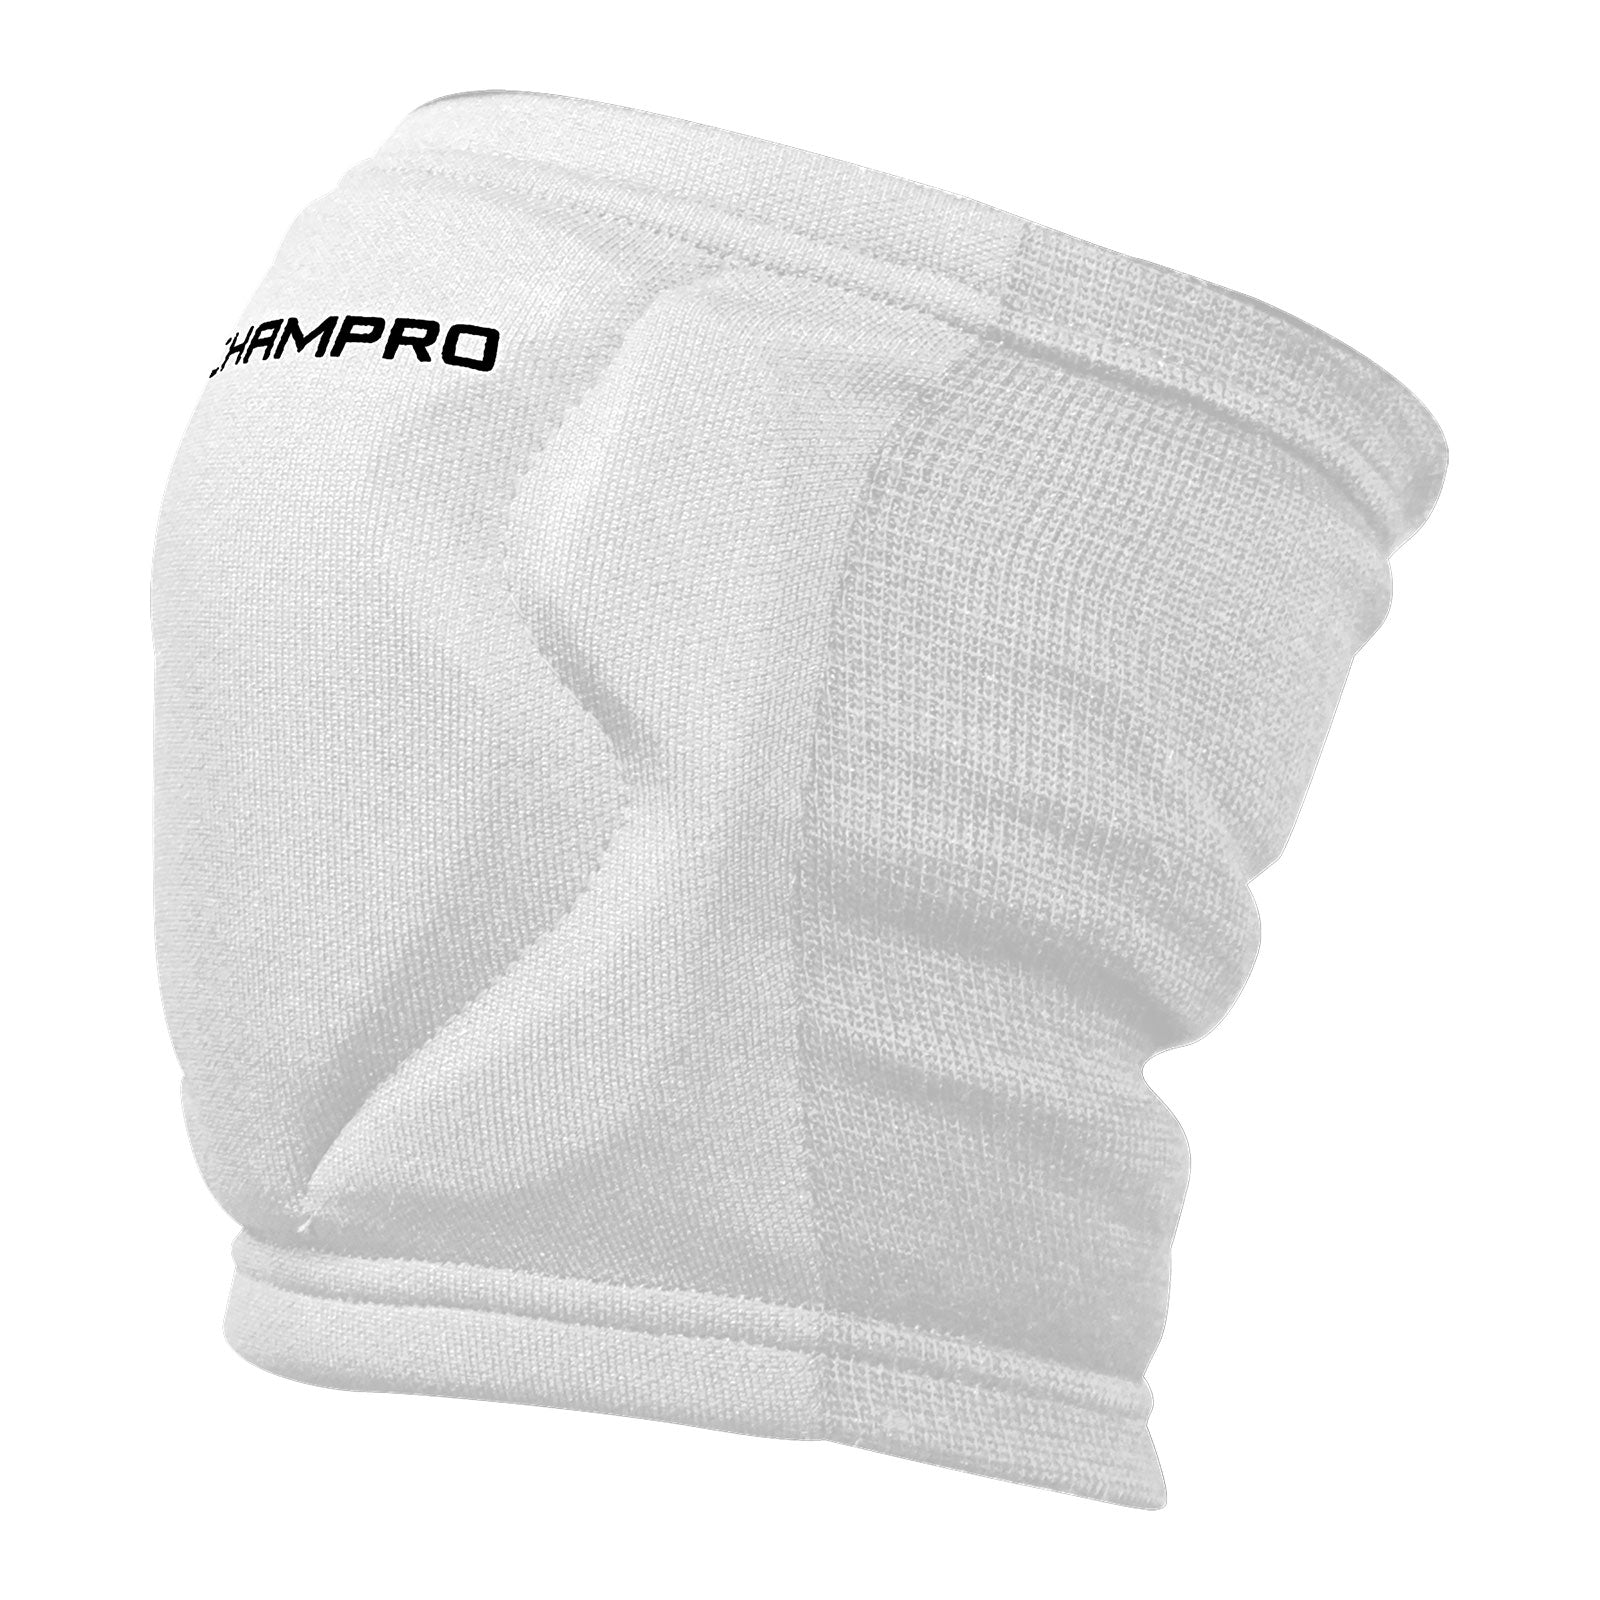 Champro MVP Low Profile Volleyball Knee Pads